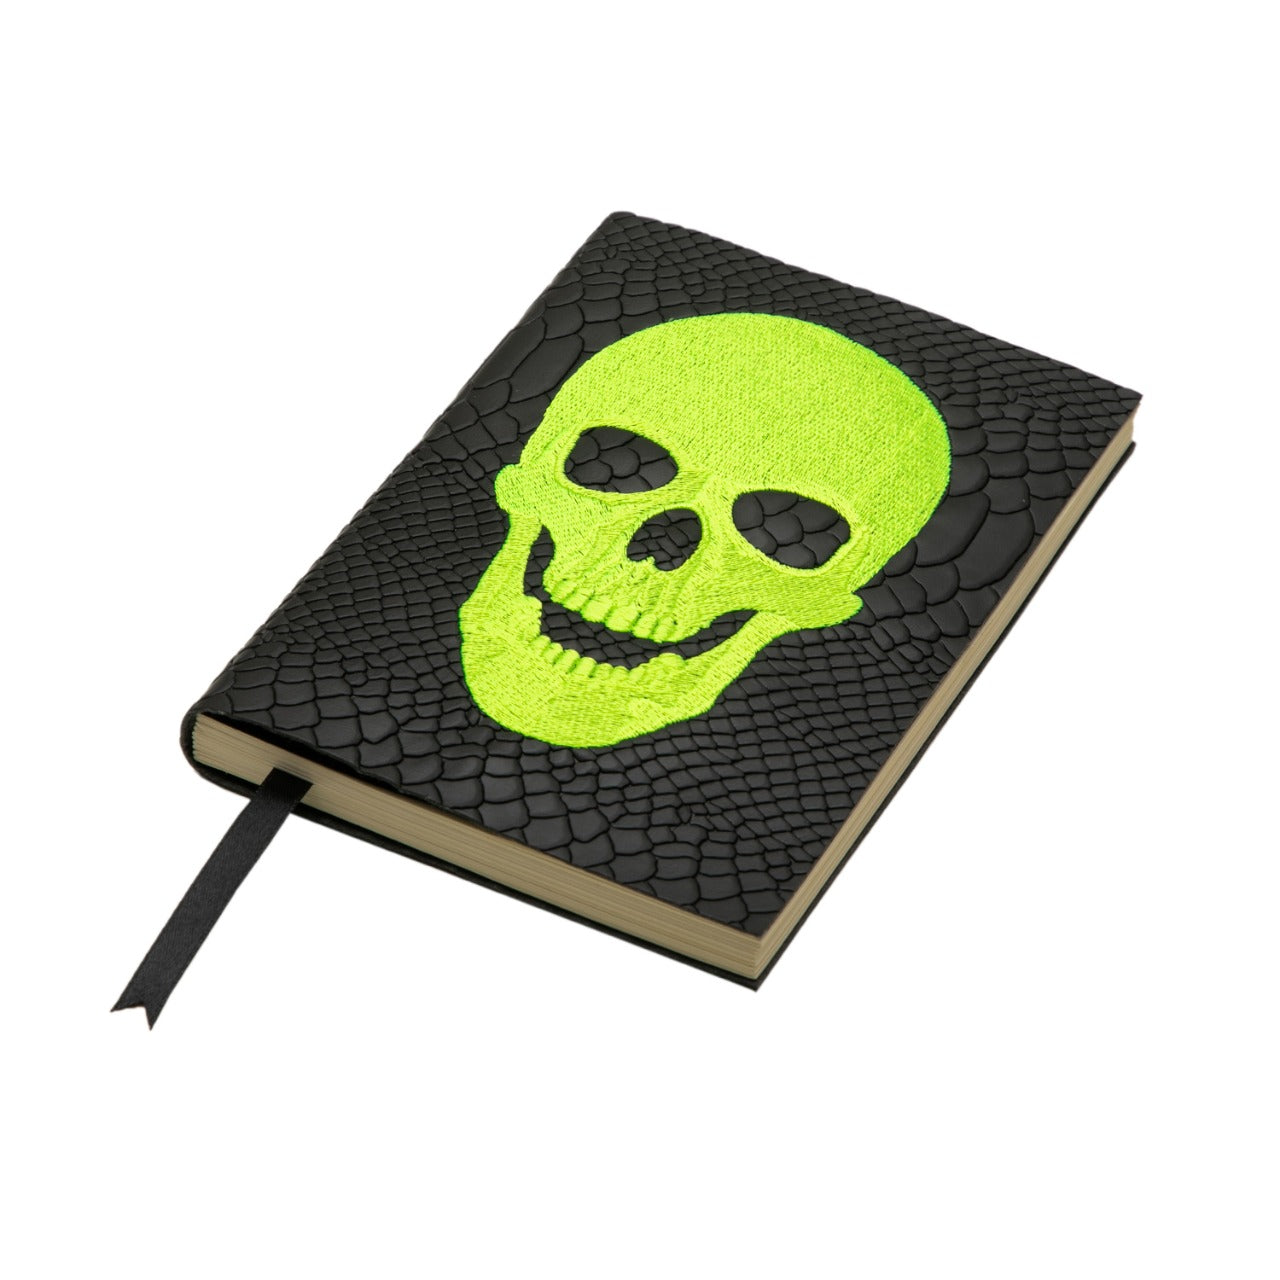 EMBROIDERED YELLOW HIGHLIGHTER SKULL NOTEBOOK